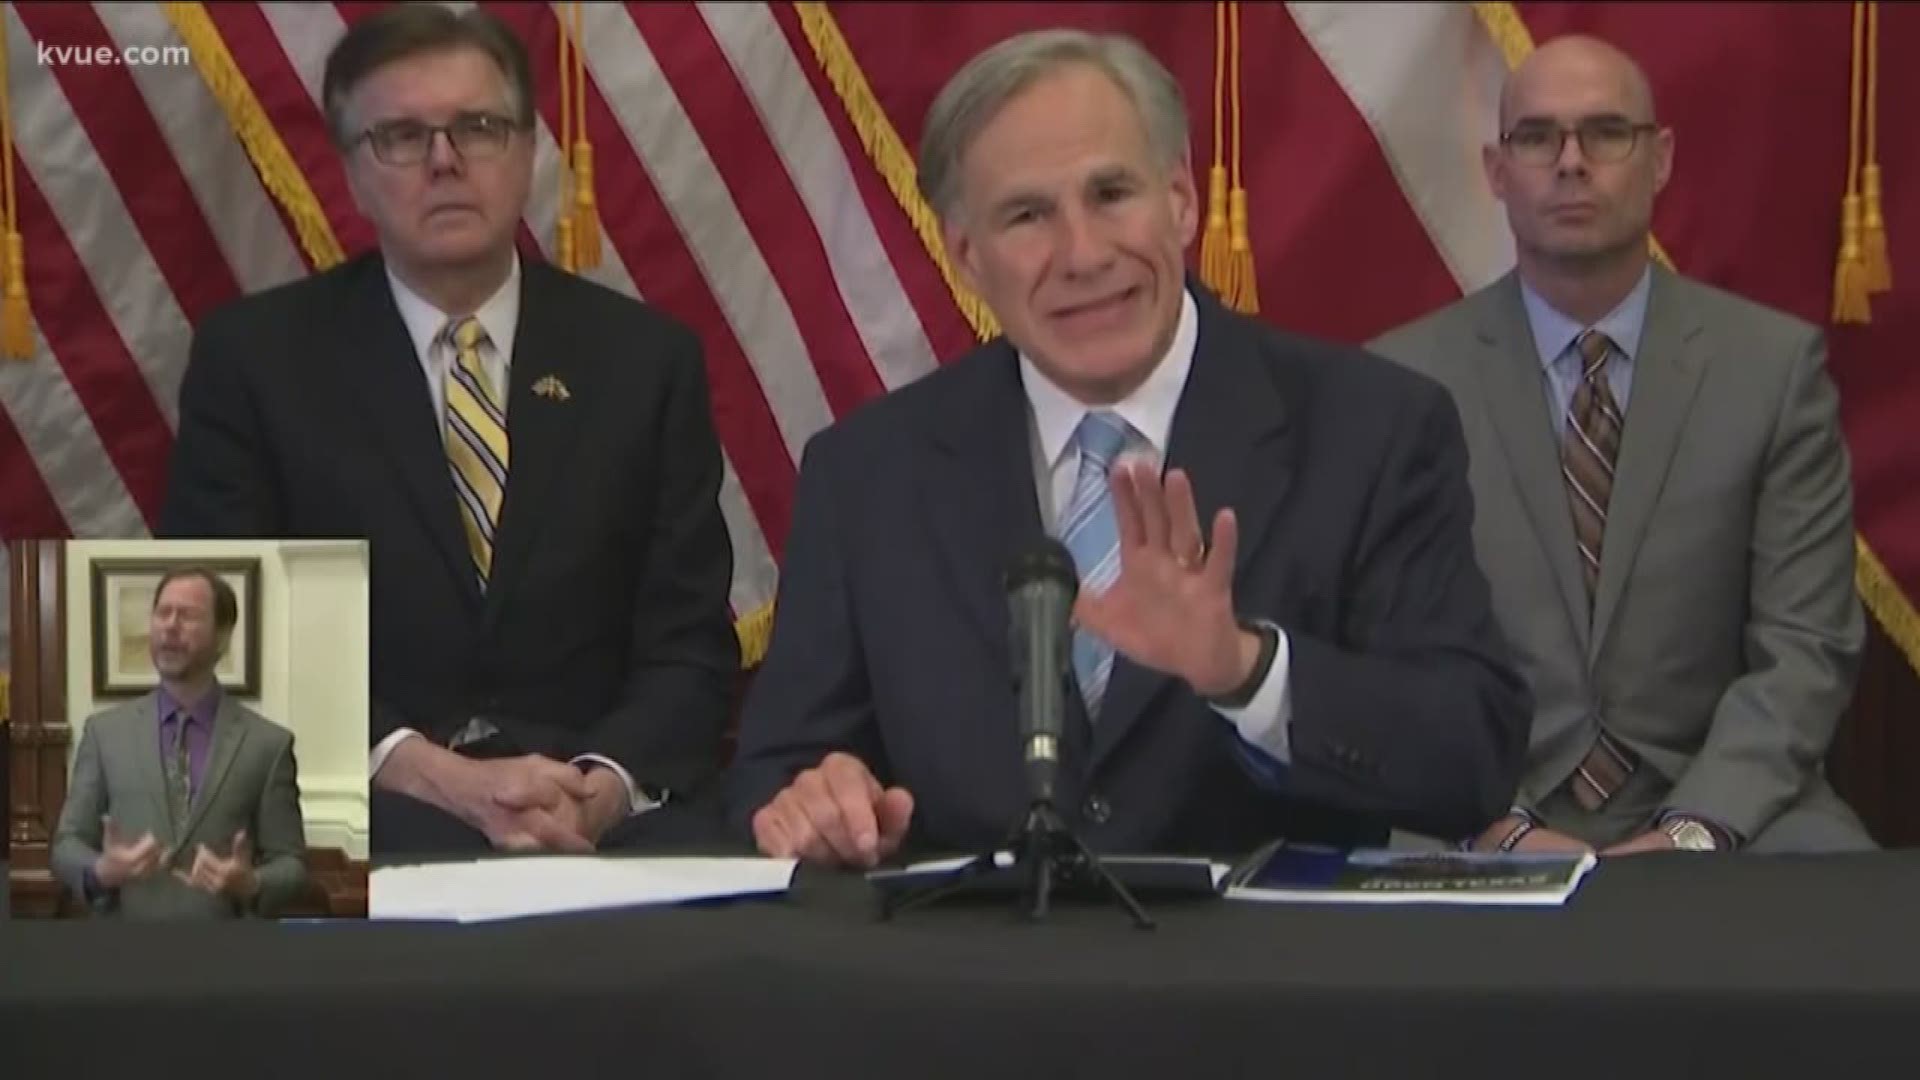 From doctors to nurses to politicians, some support Gov. Abbott's plan while others worry it's too much, too soon.